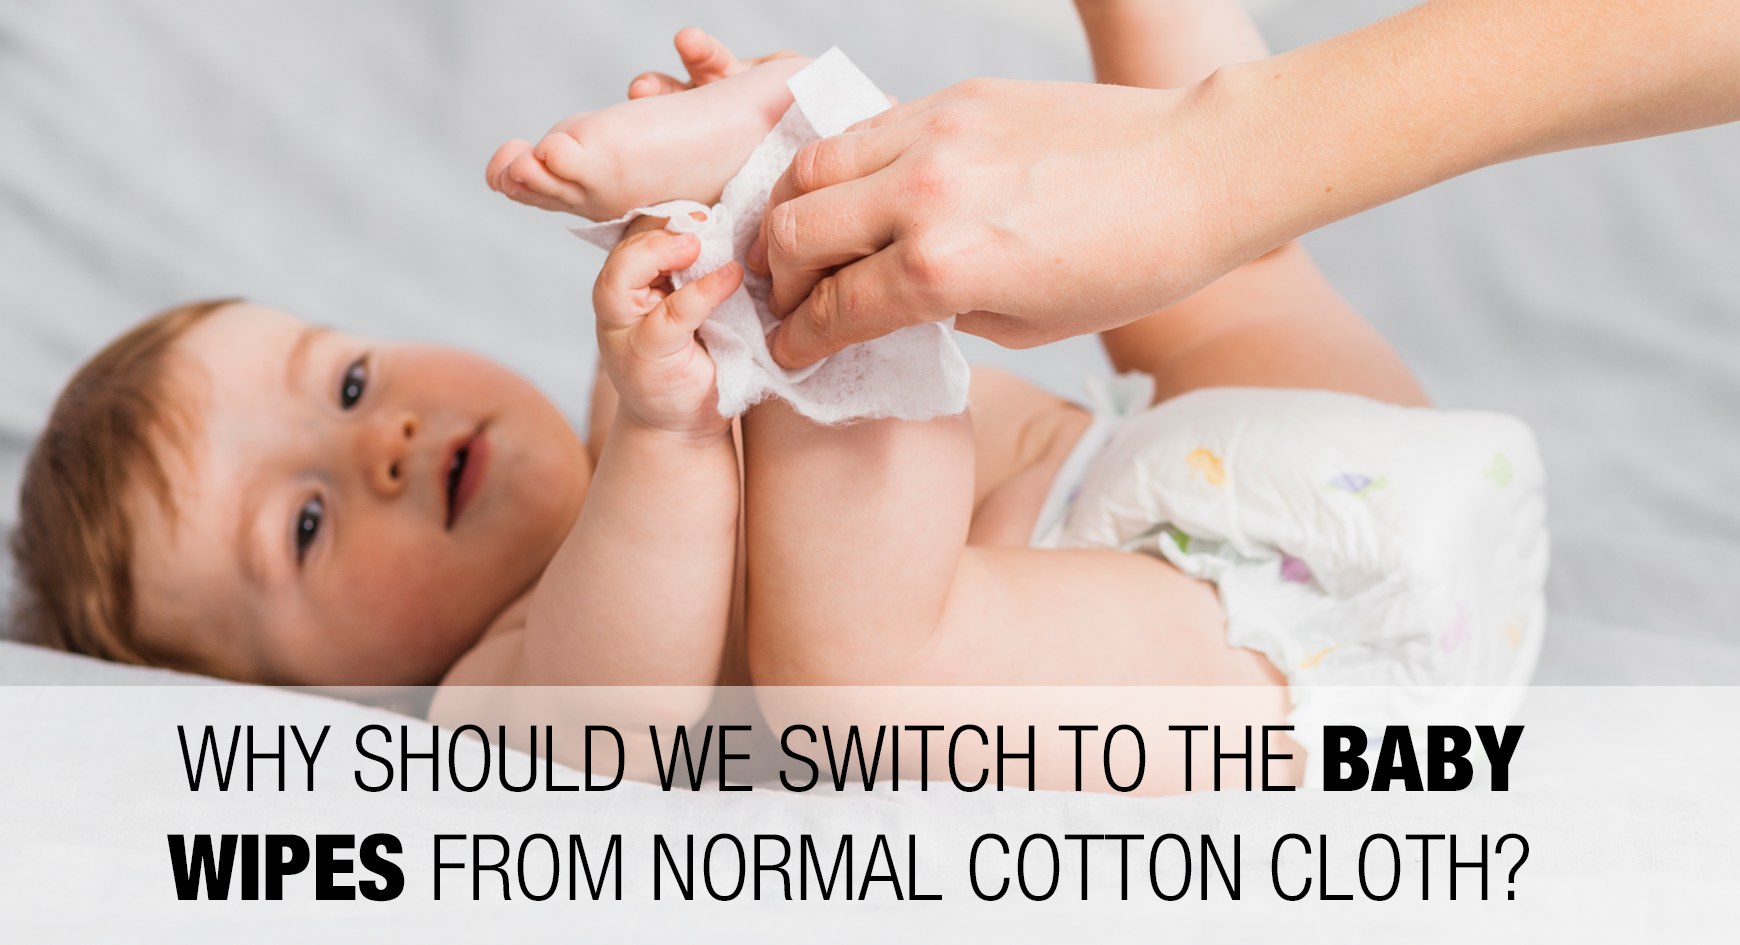 Why should we switch to the baby wipes from normal cotton cloth?